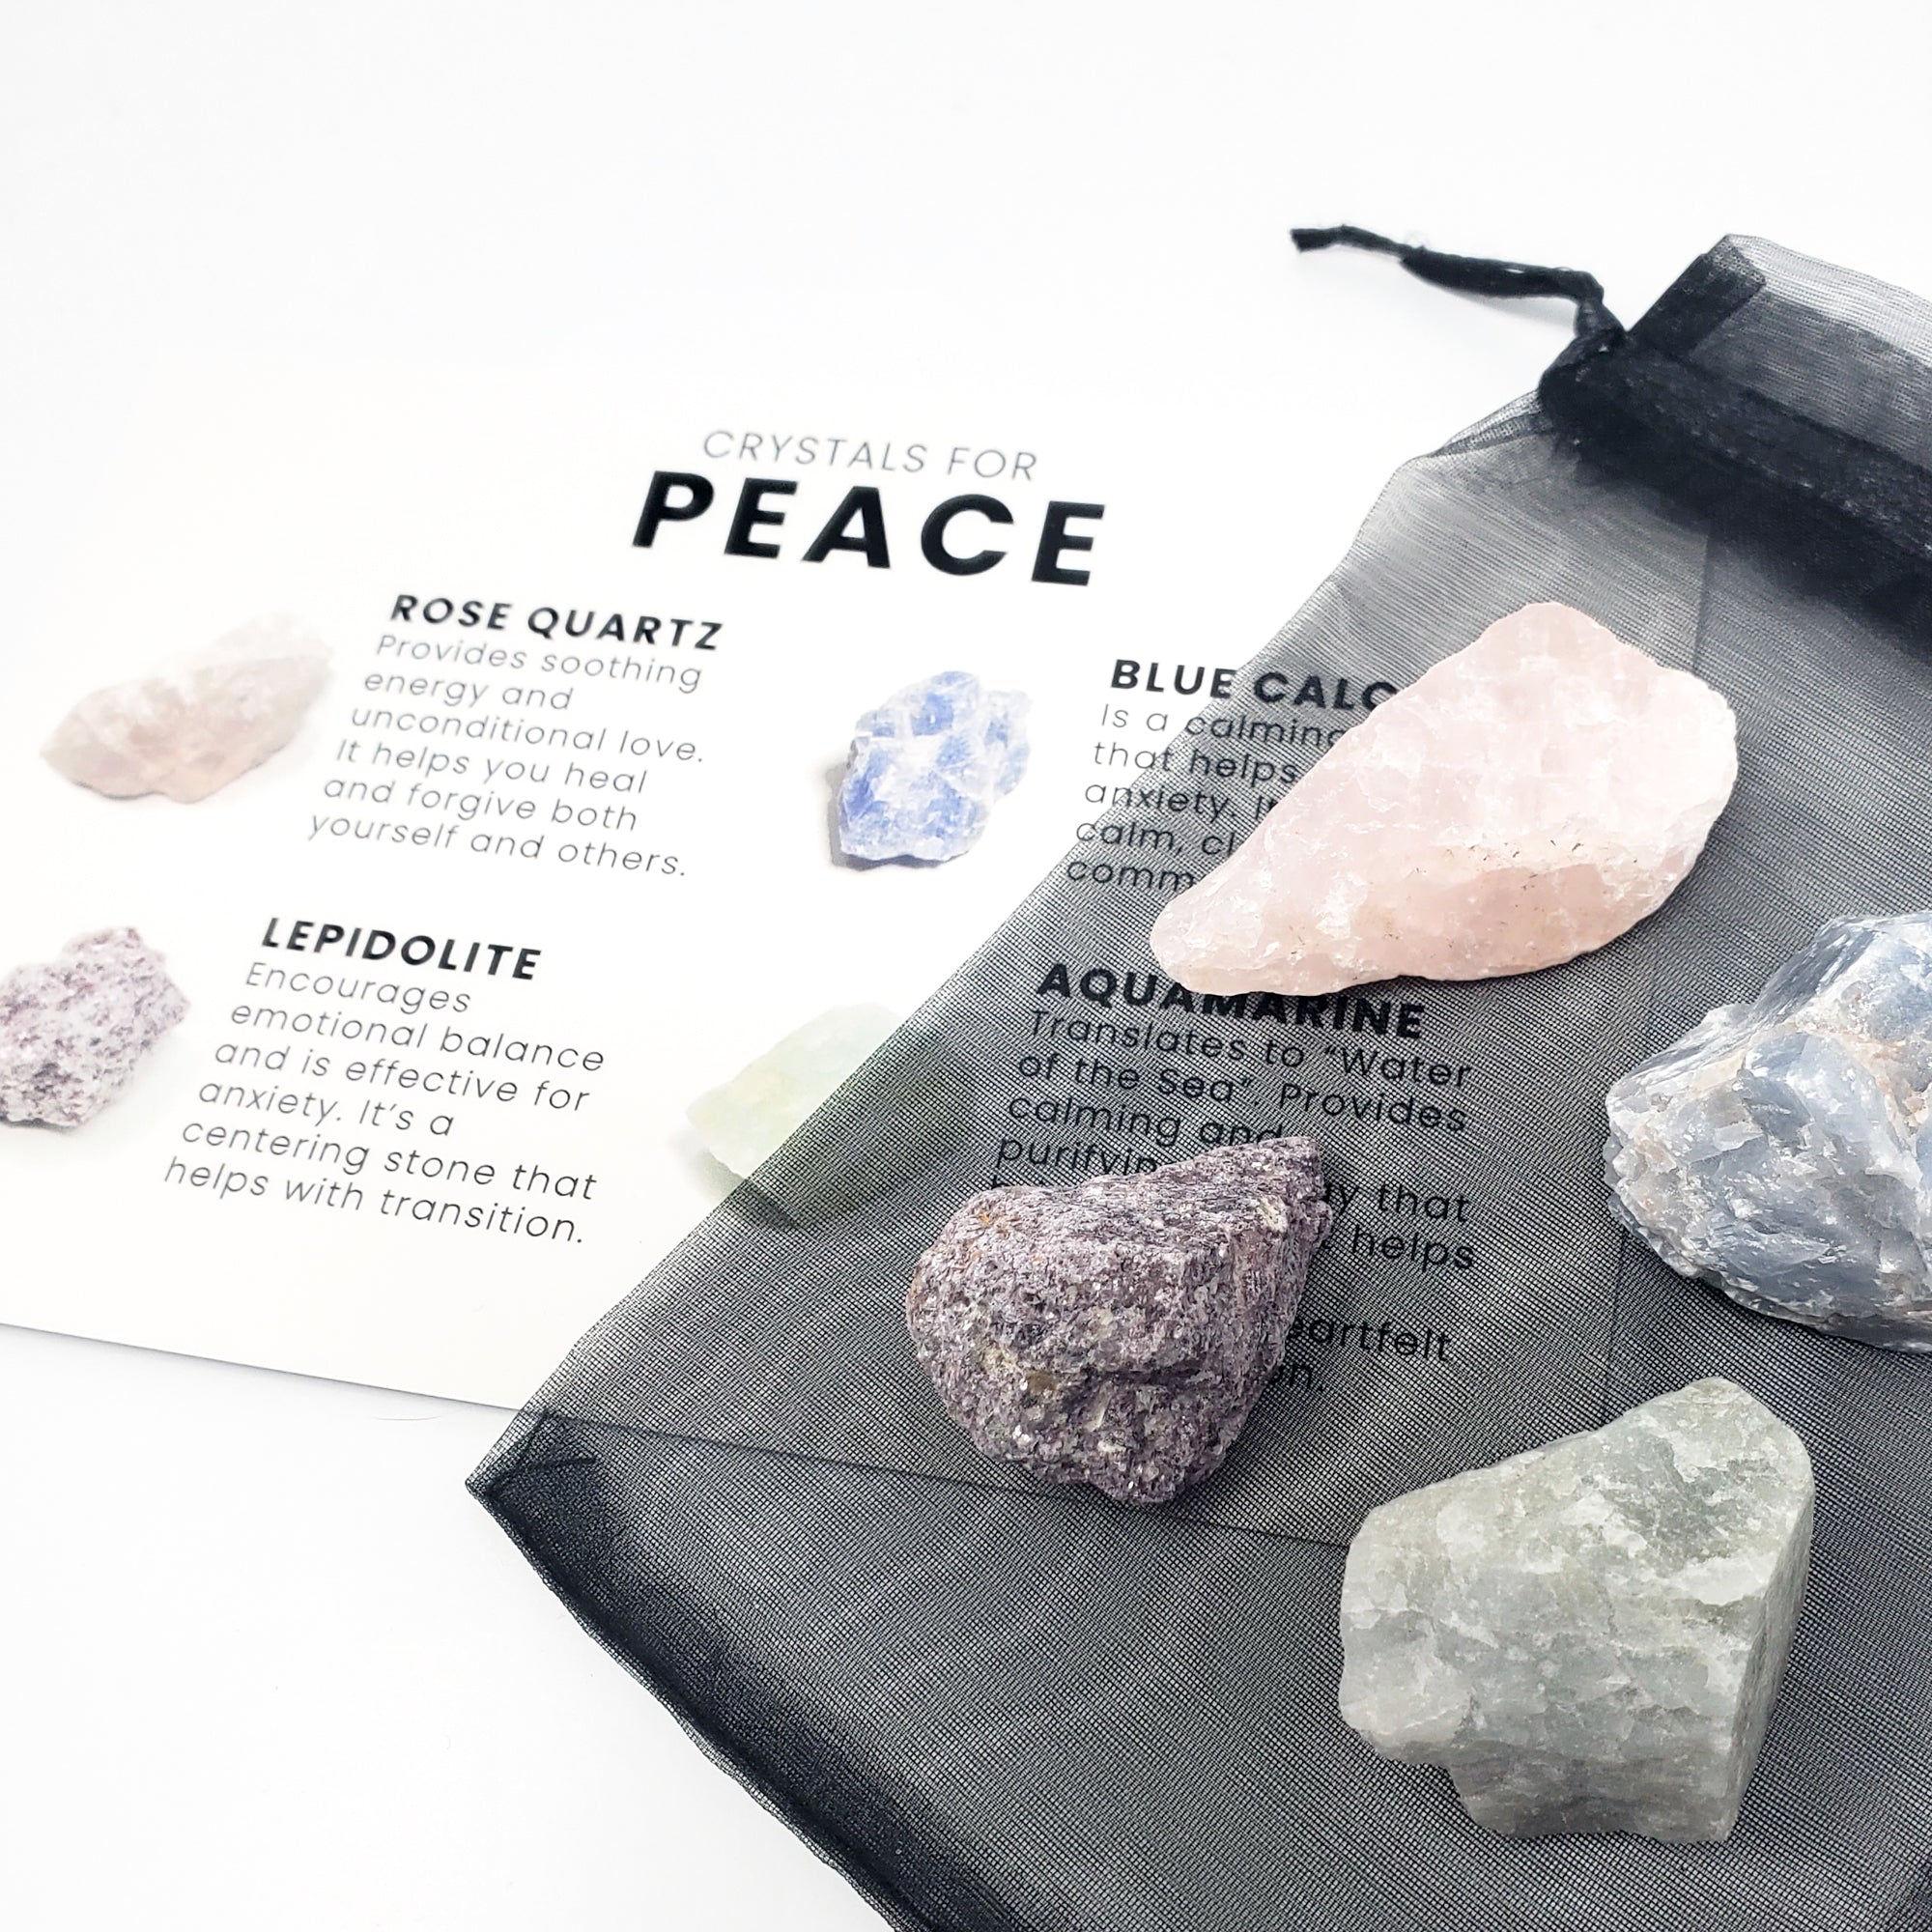 Crystals for Peace